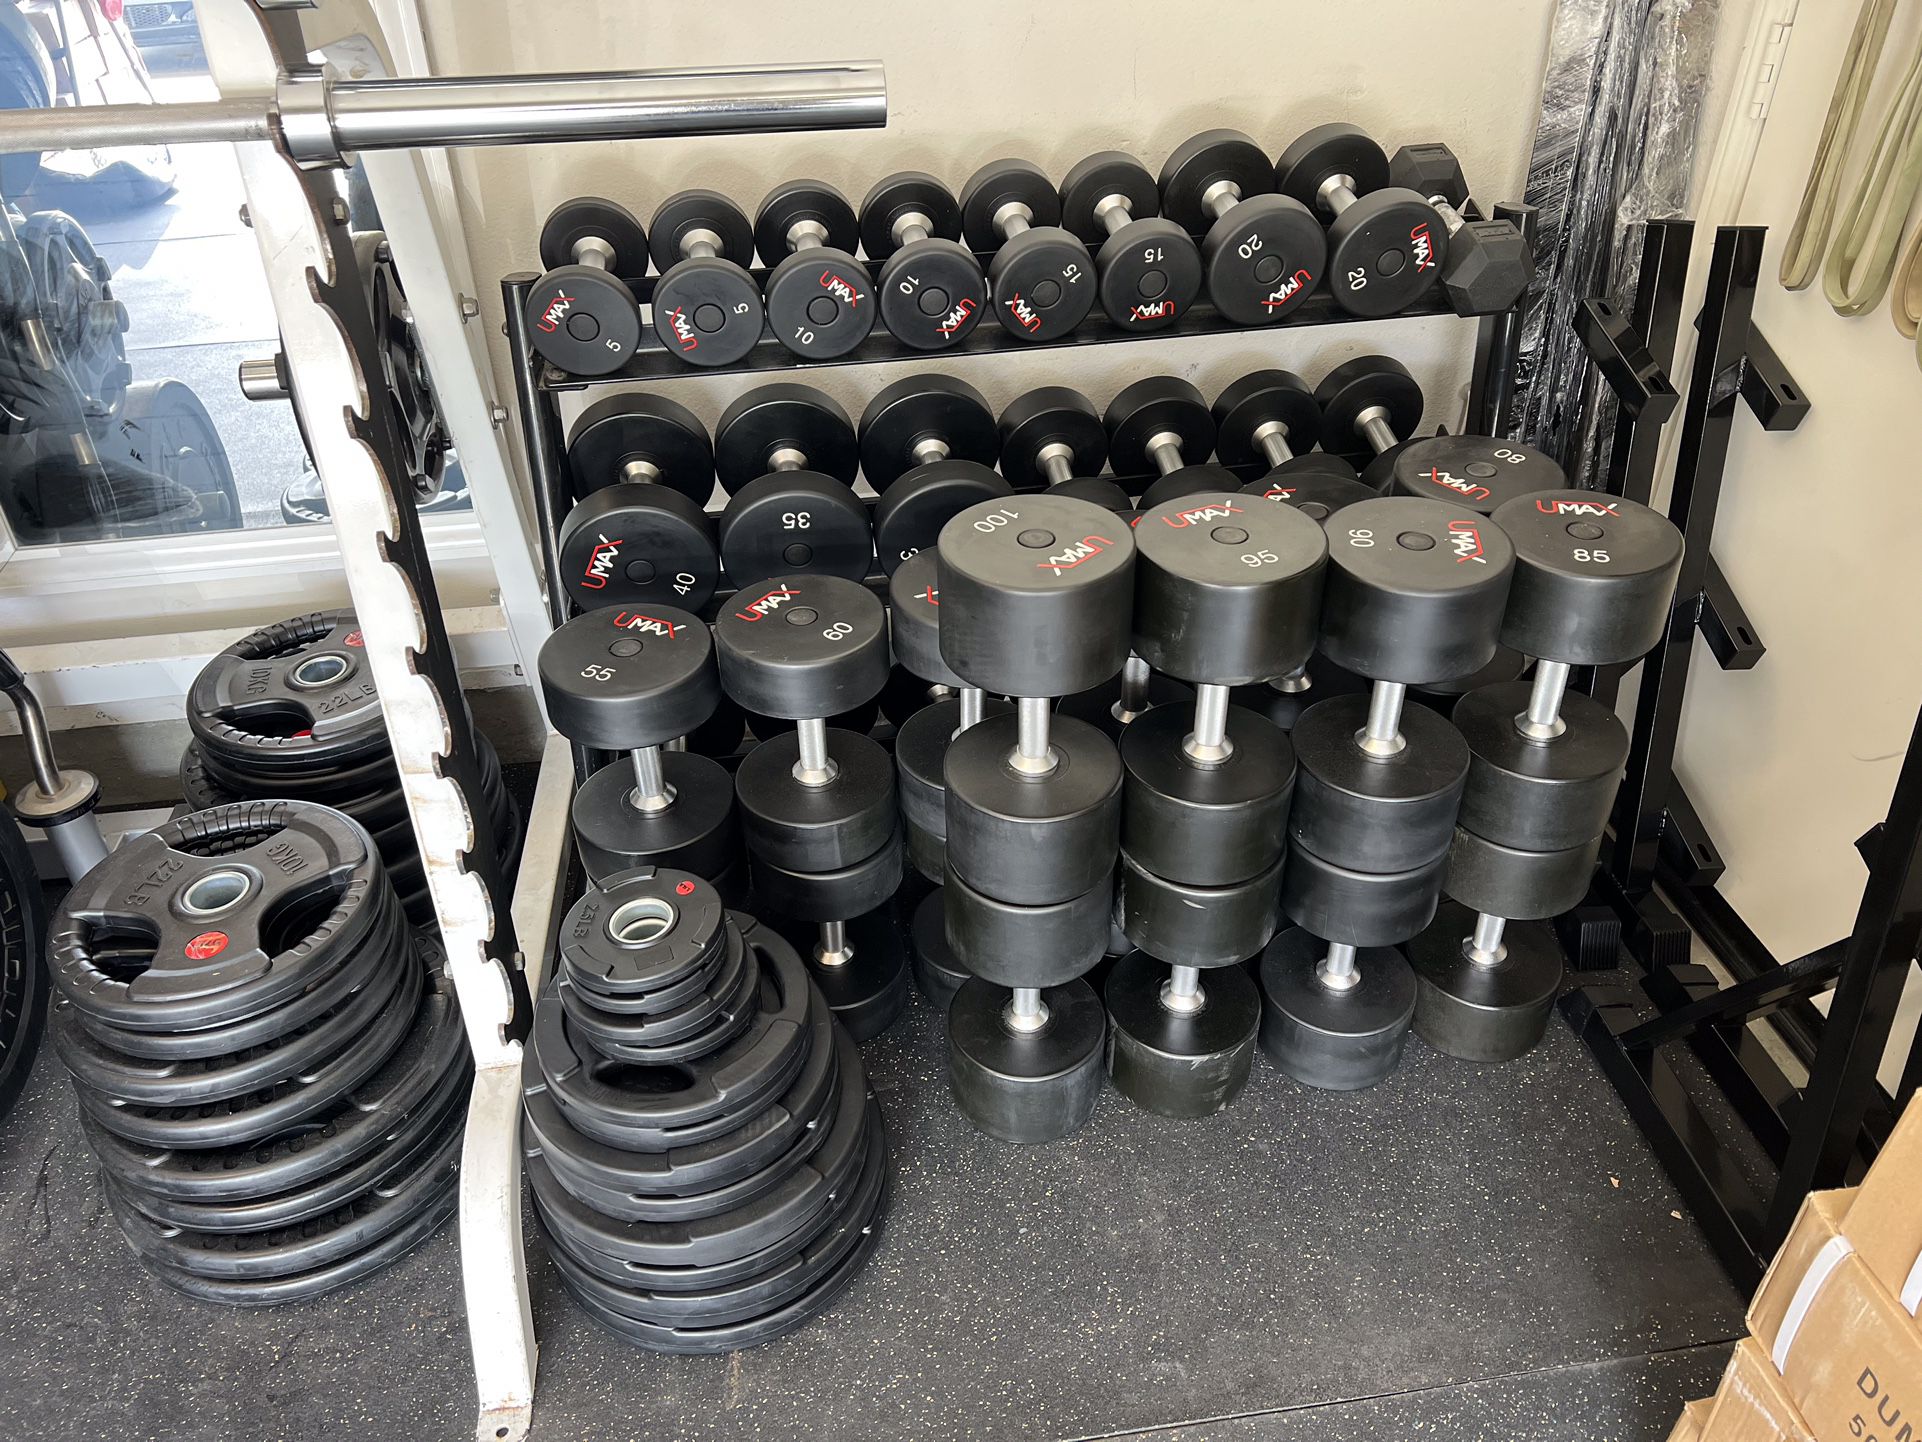 HUGE SALE ON WEIGHT LIFTING & EXERCISE STUFF: Dumbbells, Olympic Weights, Benches, Barbells, Bikes ETC